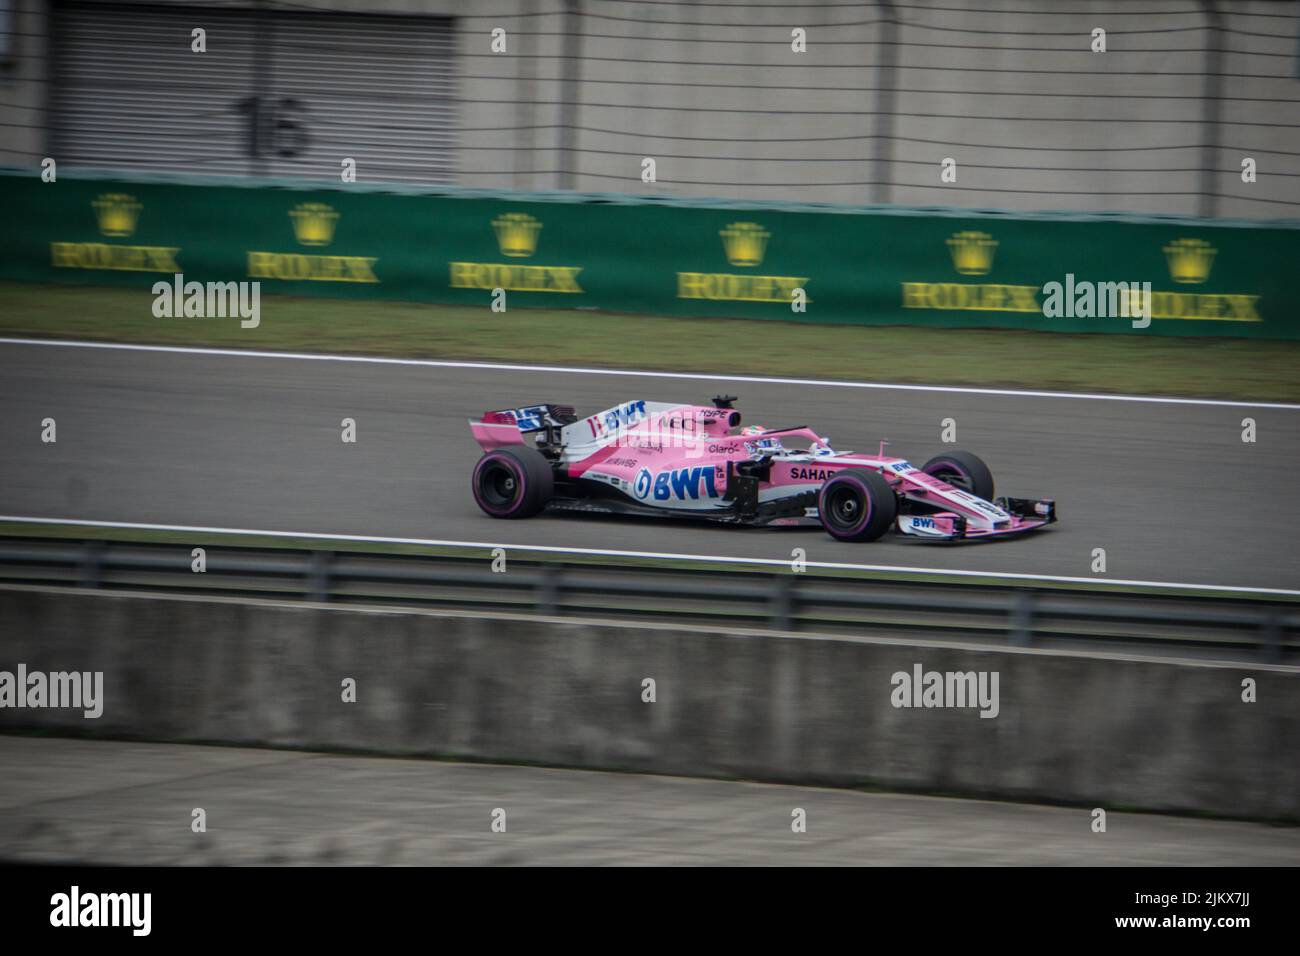 The 2018 Force India F1 car in China between turns 15 and 16 Stock Photo